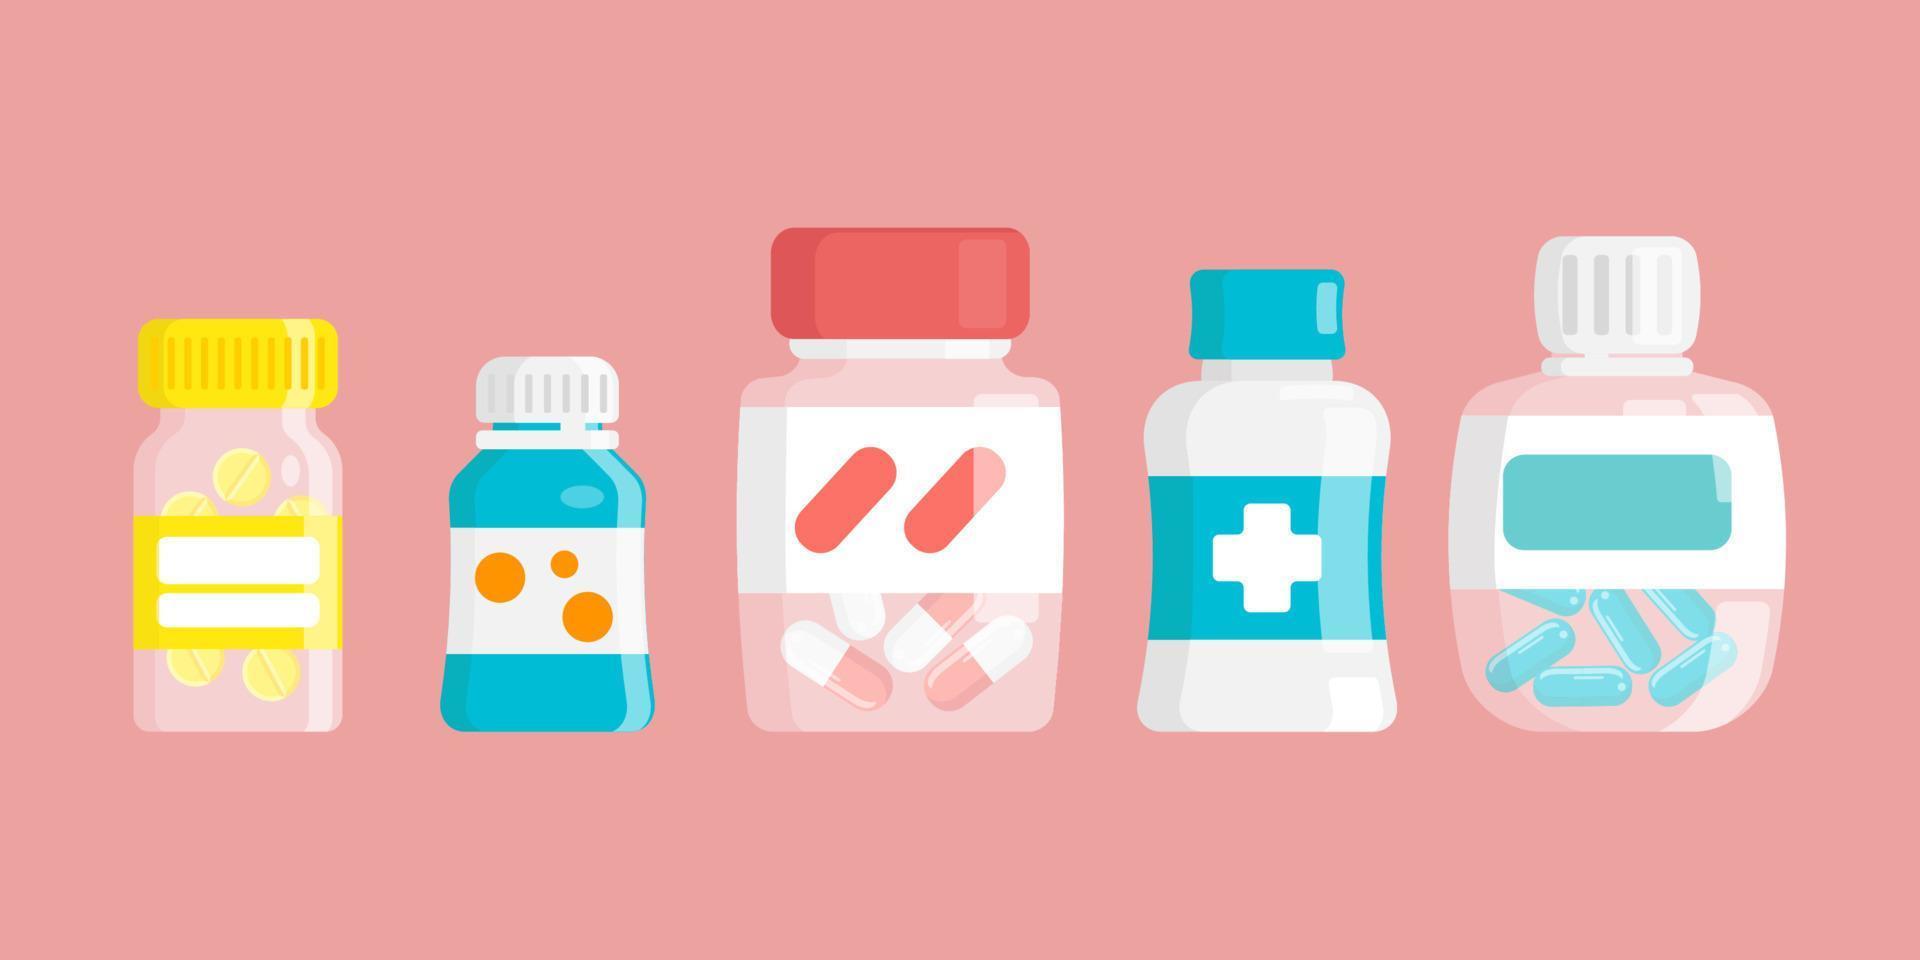 Set of Medicine Bottles with labels and Pills. Prescription drugs, tablets and capsules. Isolated vector illustration.